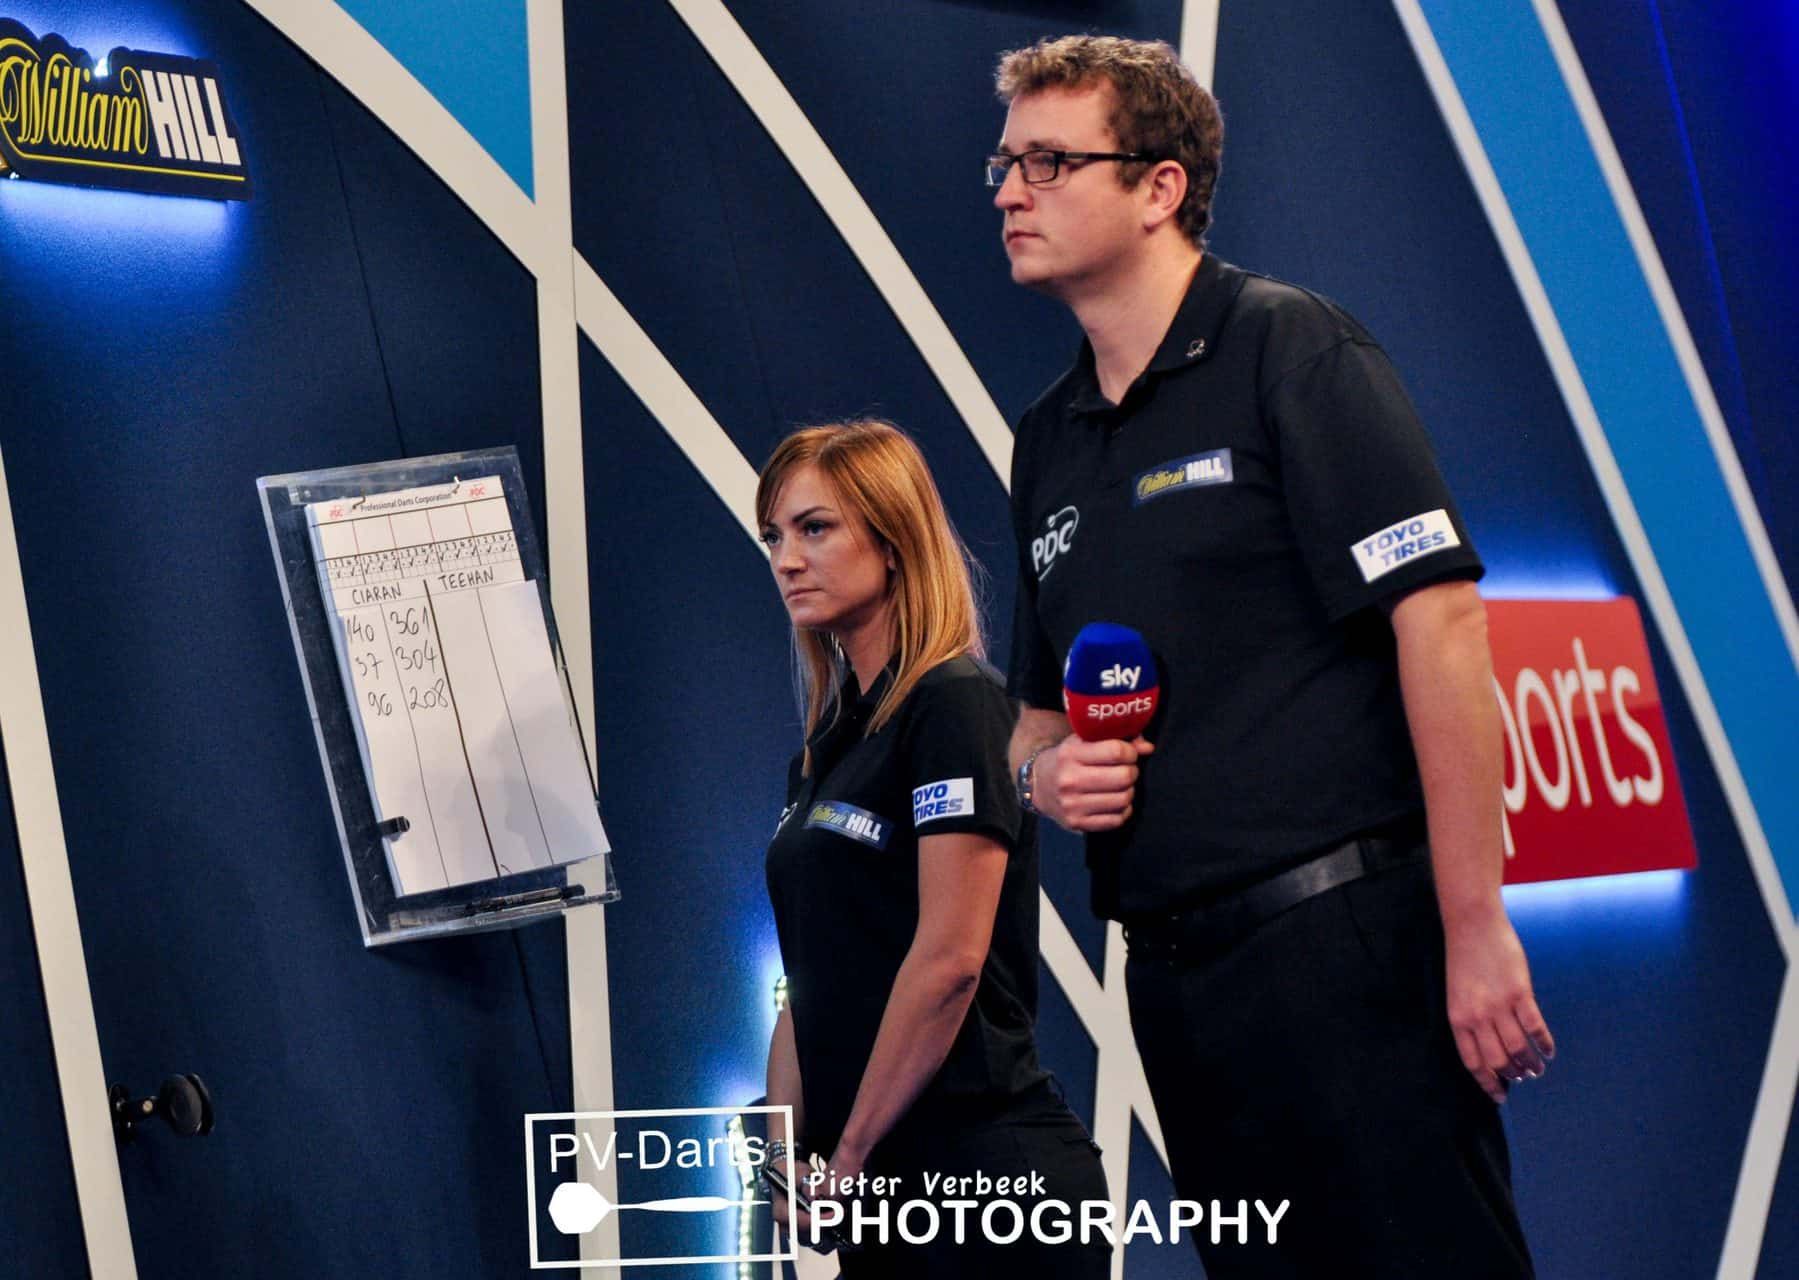 Hungarian becomes first female scoring official at World Championship Dartsnews